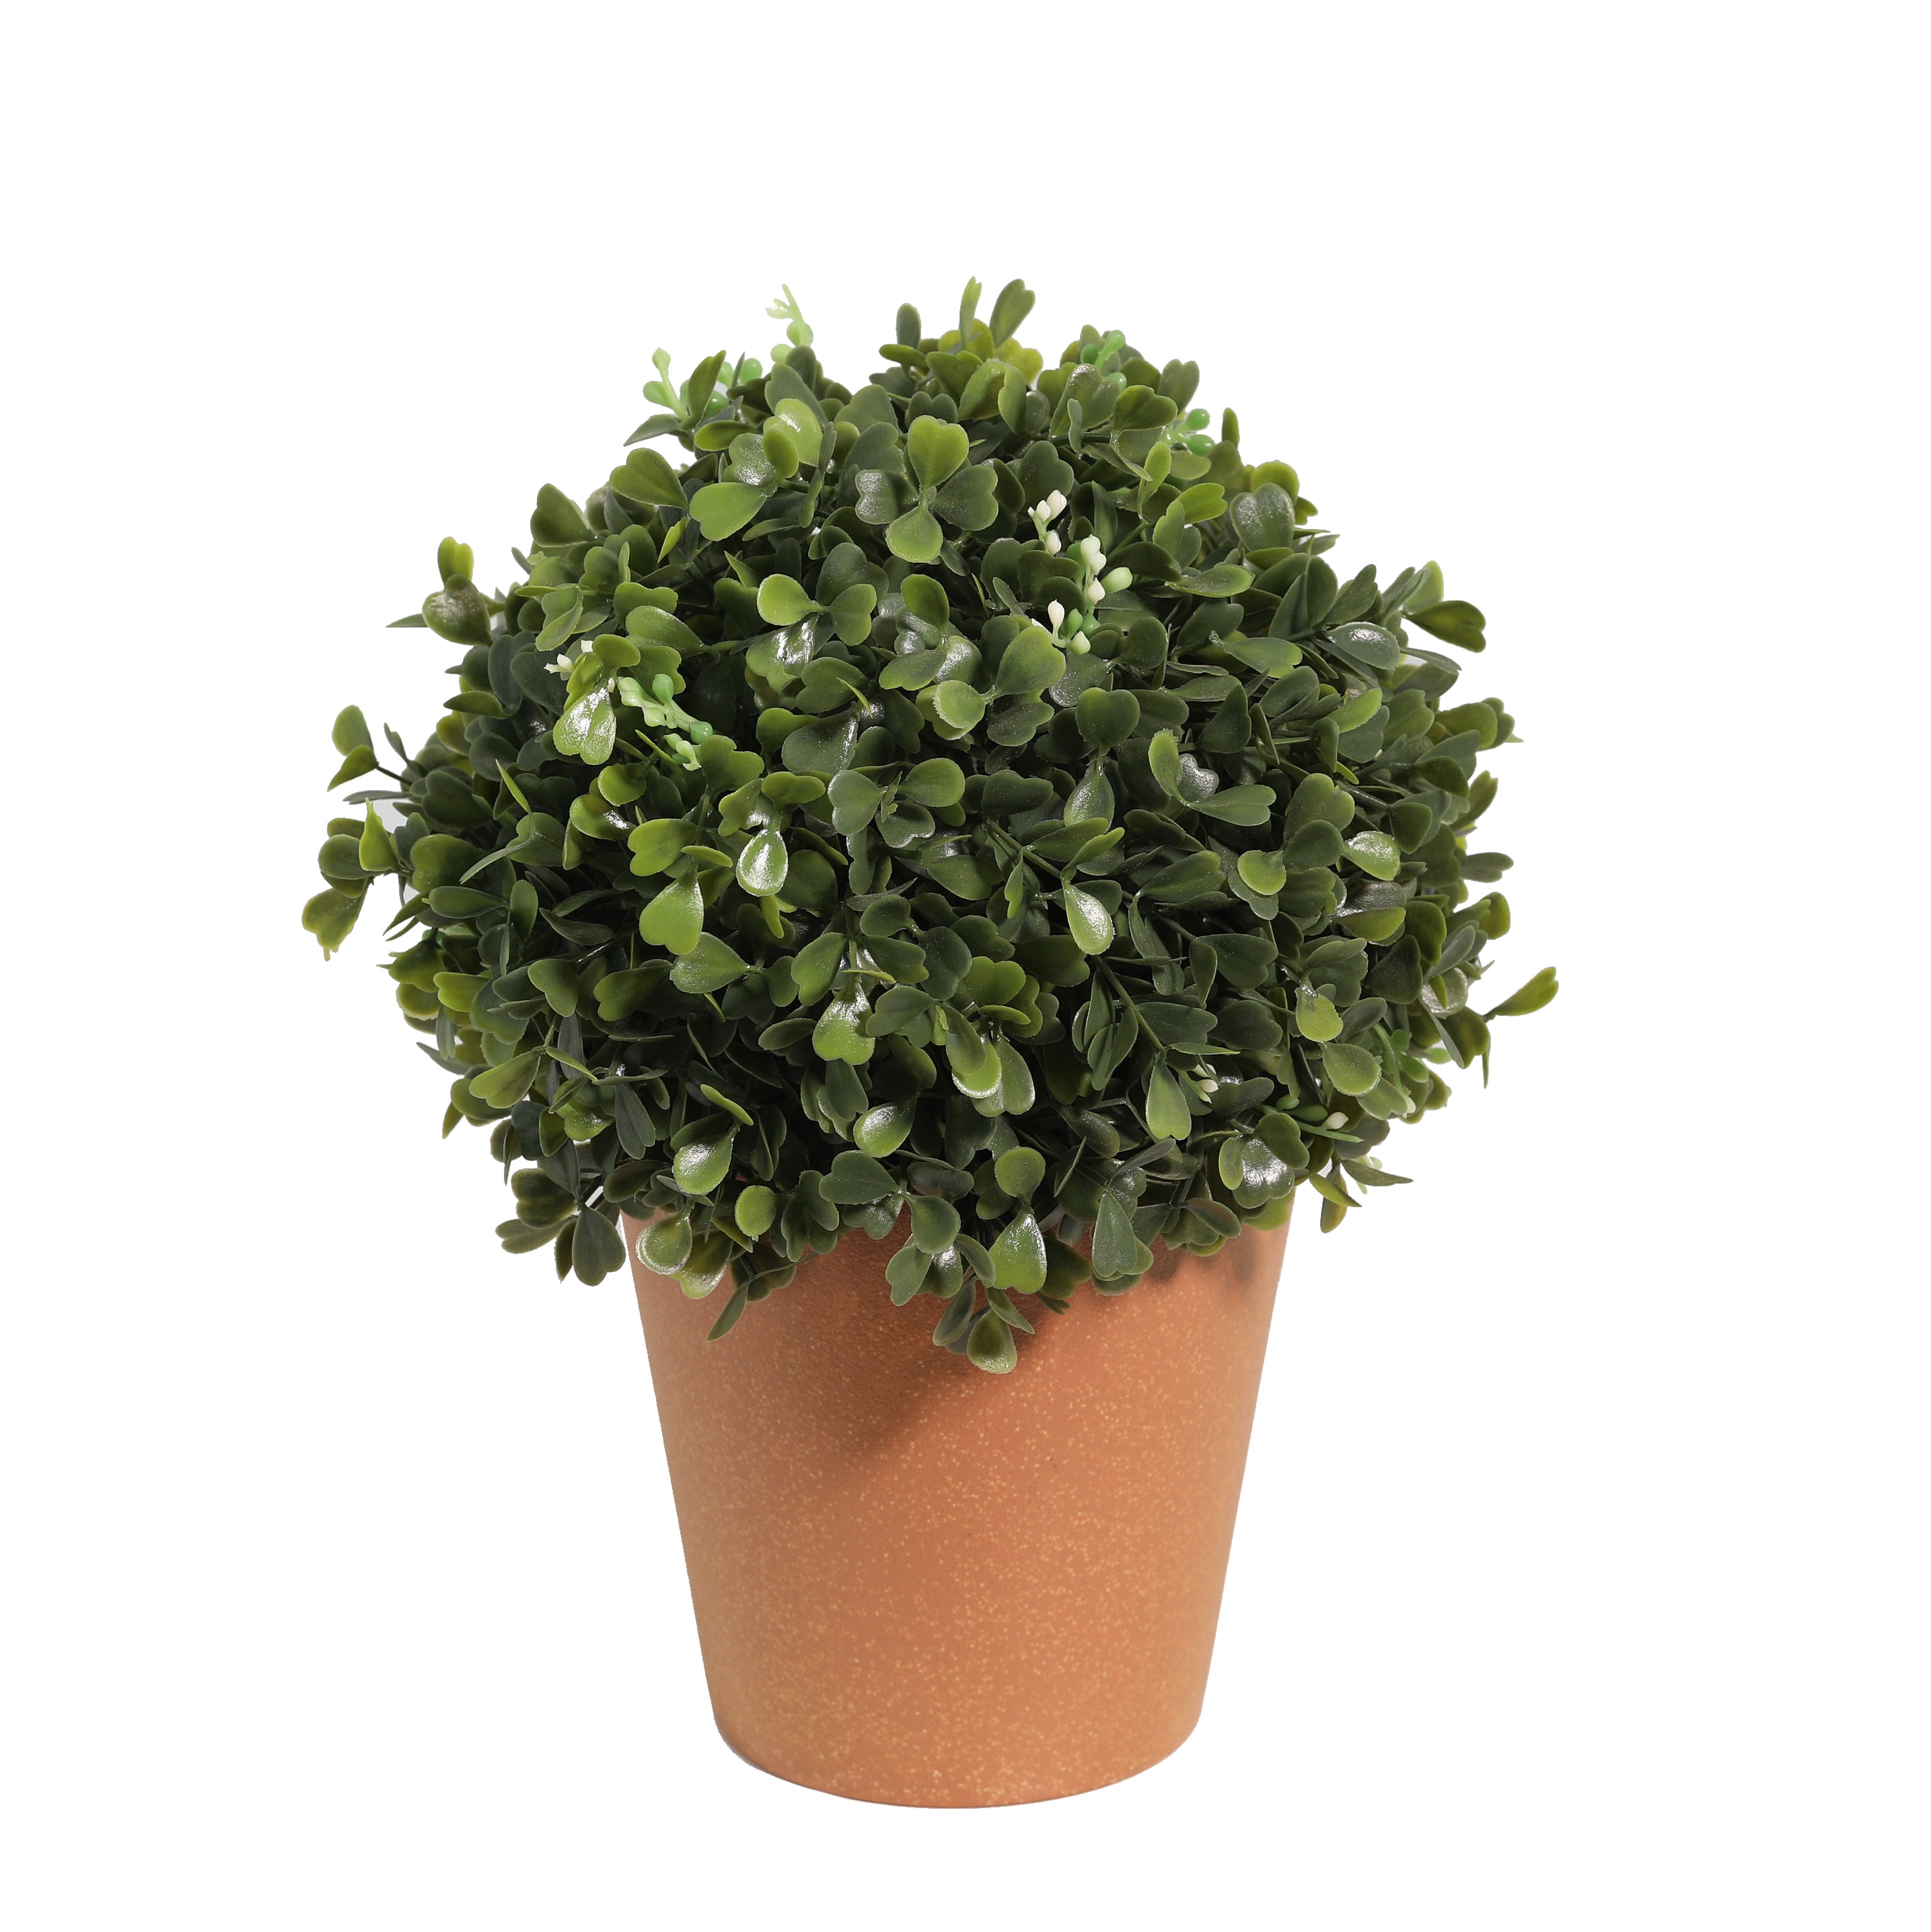 Mainstays 11" Artificial Boxwood Topiary Plant Terracotta Pot in Green